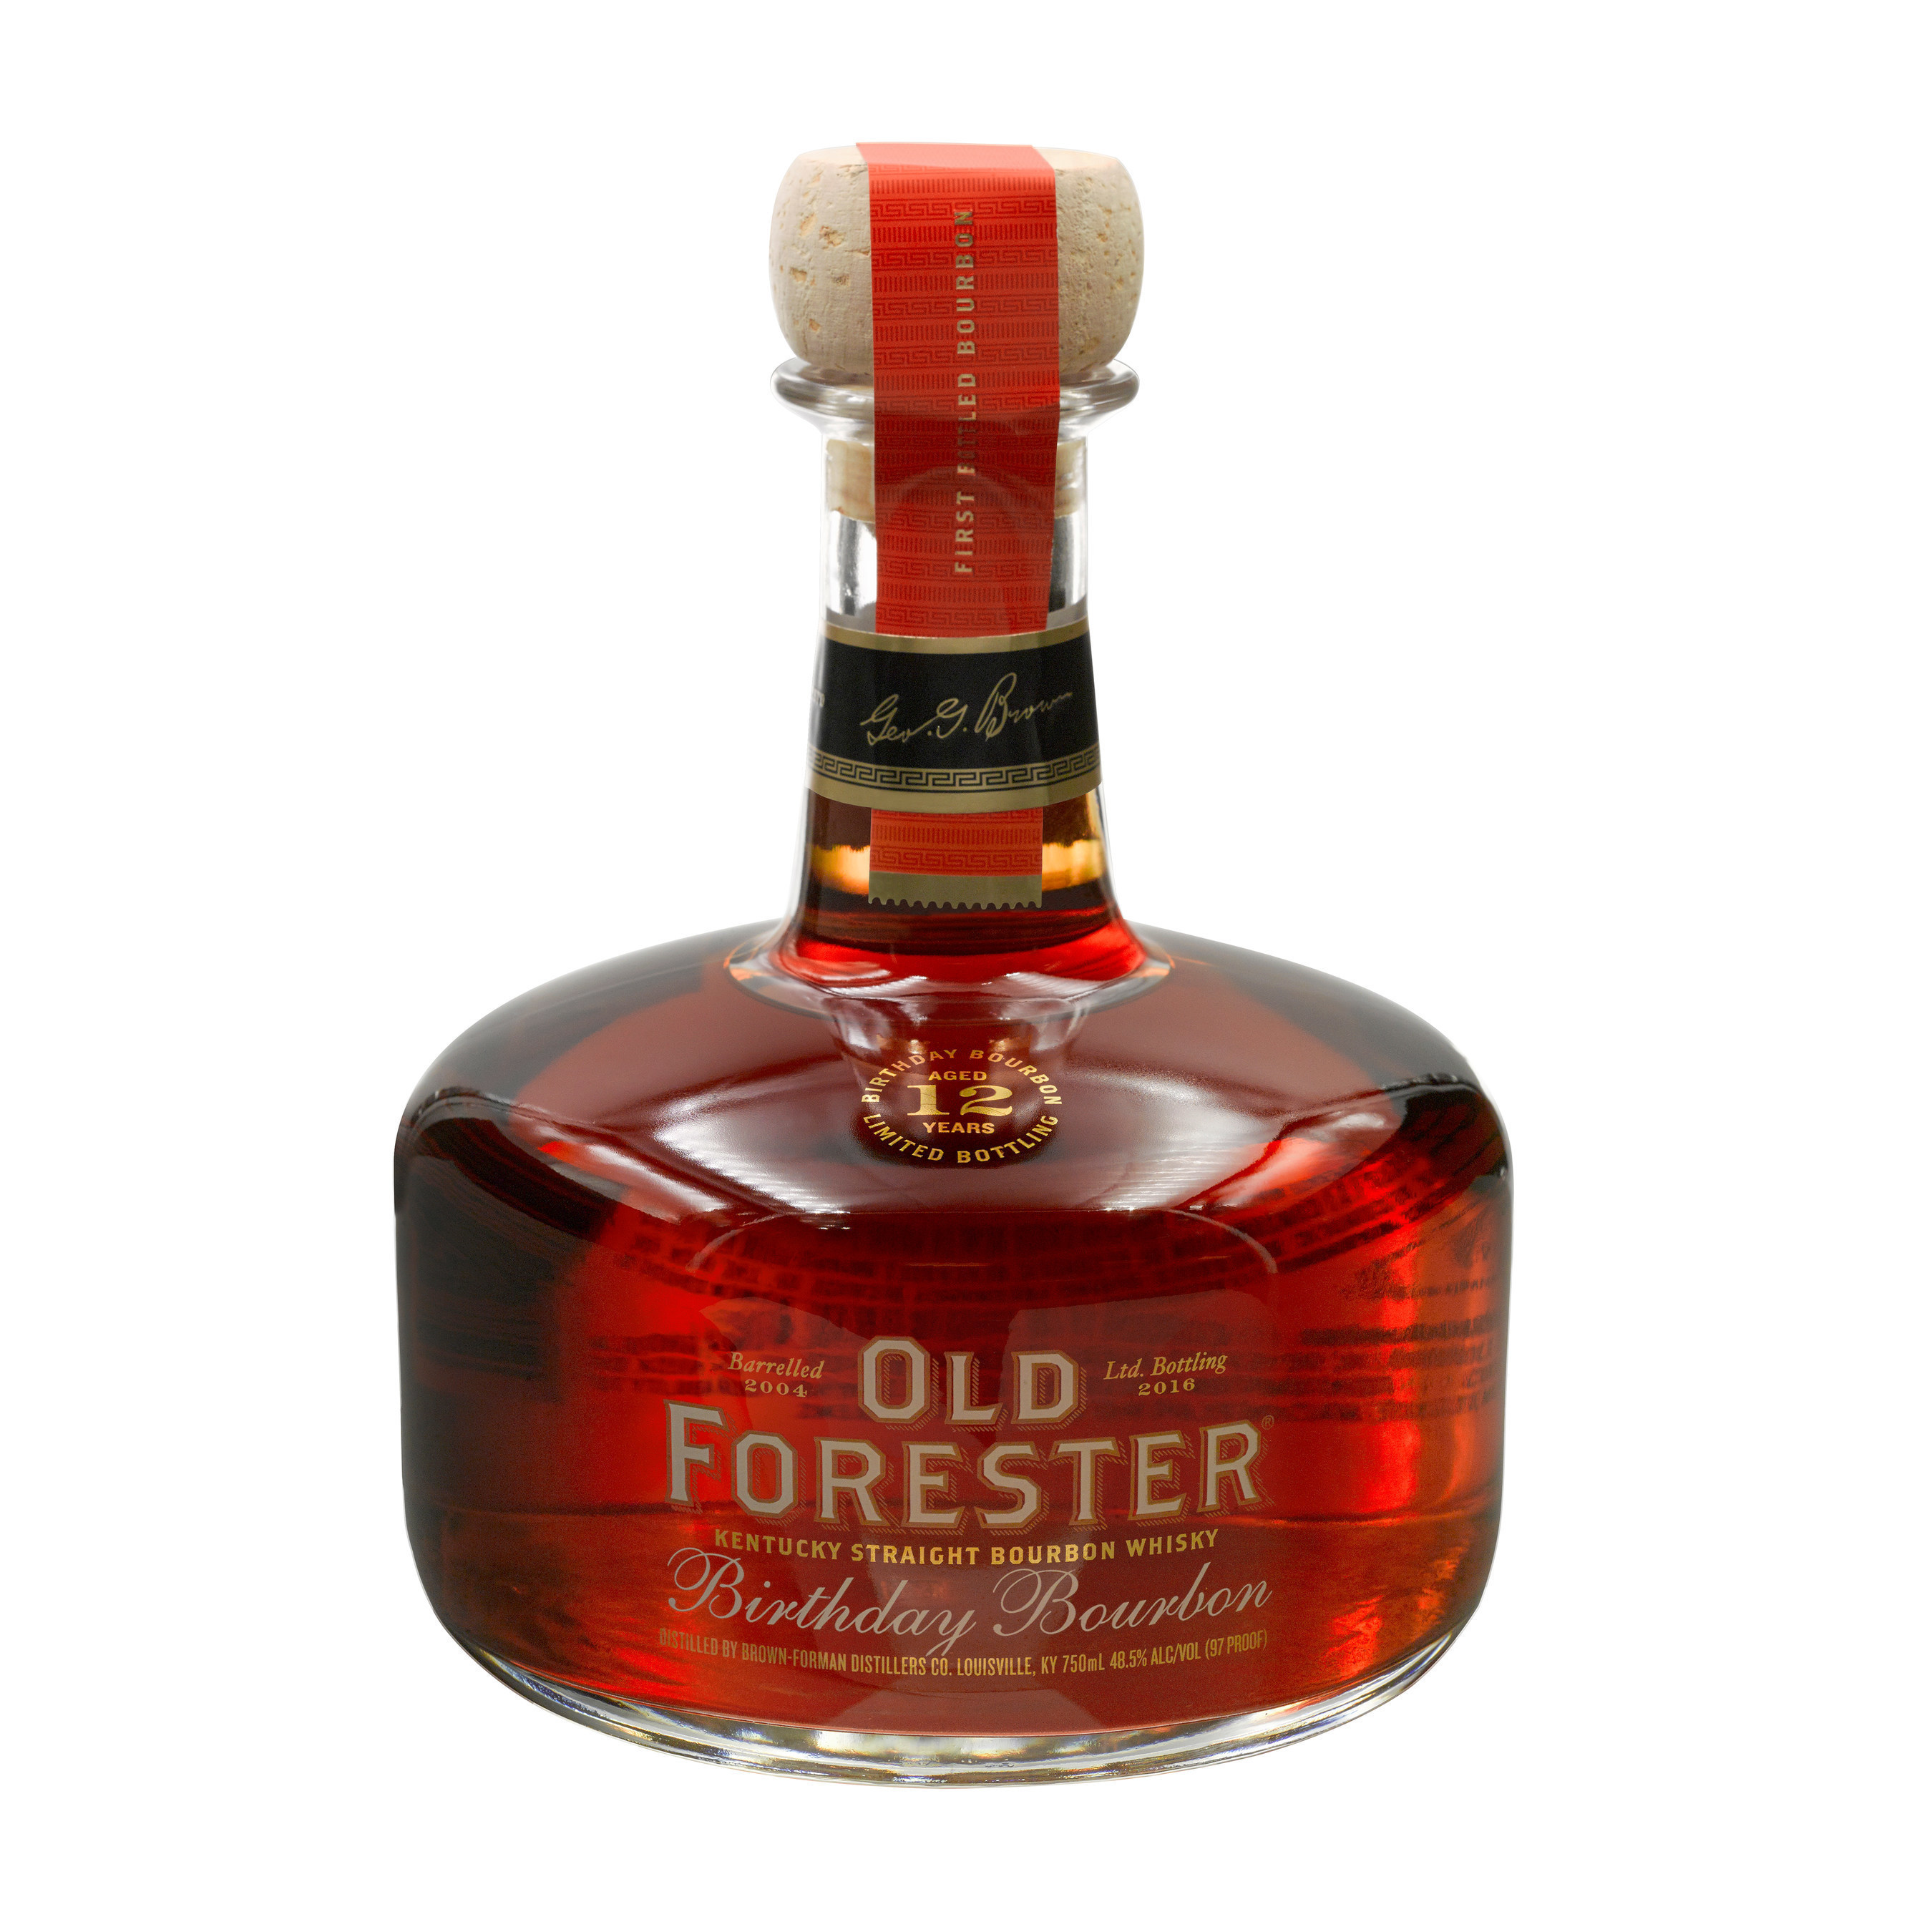 Old Forester Kentucky Straight Bourbon Whisky releases 2016 Birthday Bourbon product at 97 Proof. This release will soon be available nationally in very limited quantities.